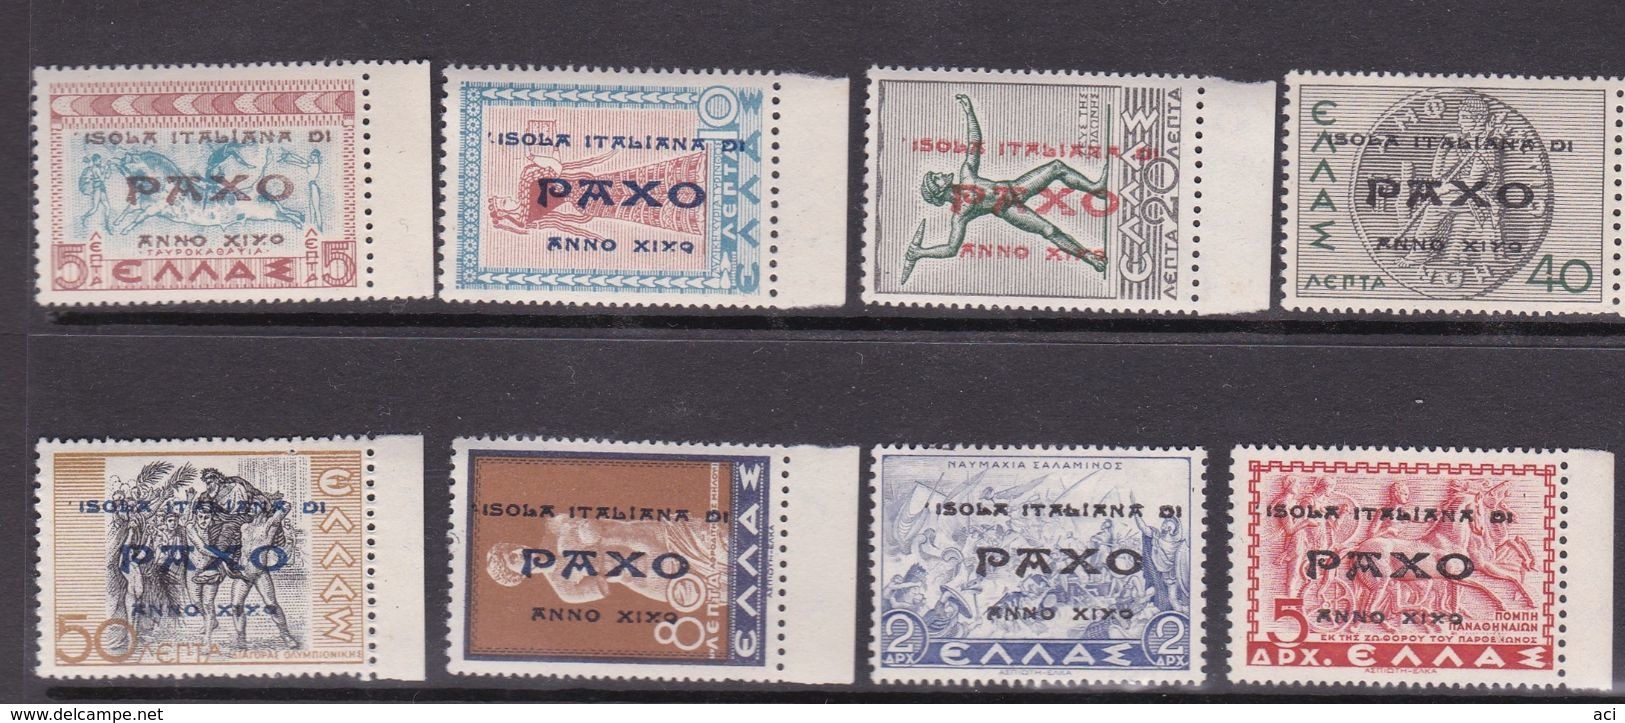 Italy-WW II Occupation-Isole Ionie, Paxos S 1-8 1942 Greek Stamps Overprinted, MNH - Îles Ioniennes